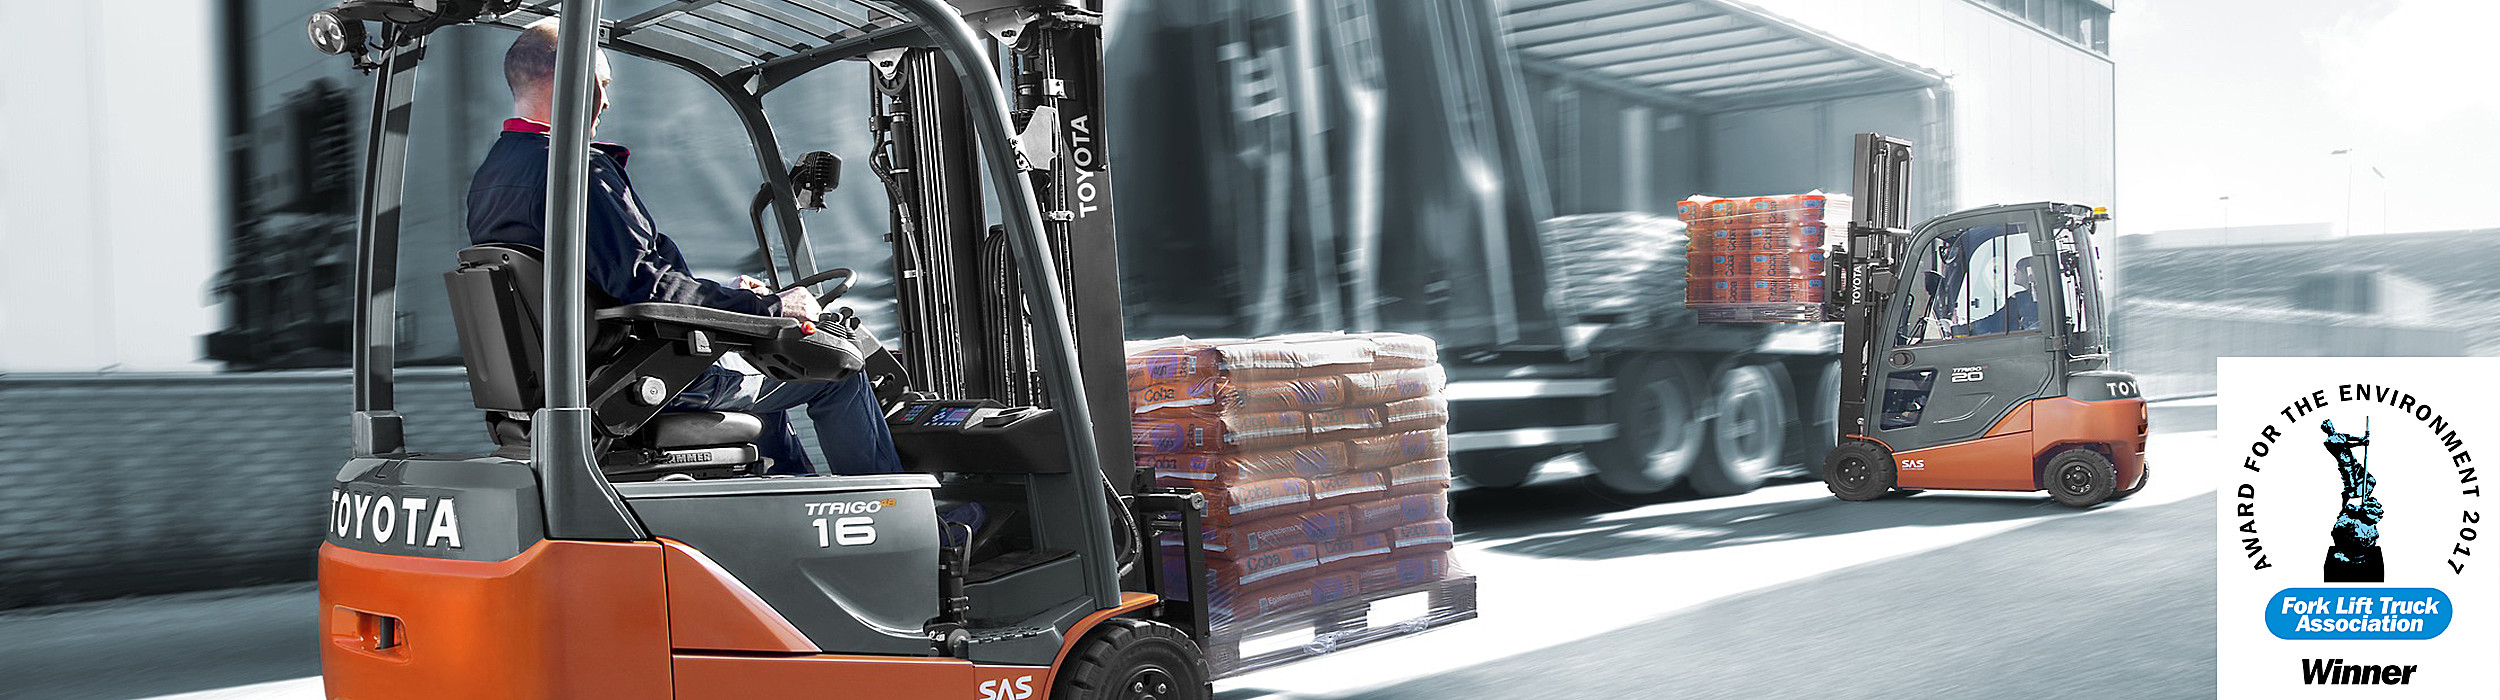 Toyota Traigo electric counterbalance forklifts used in transport